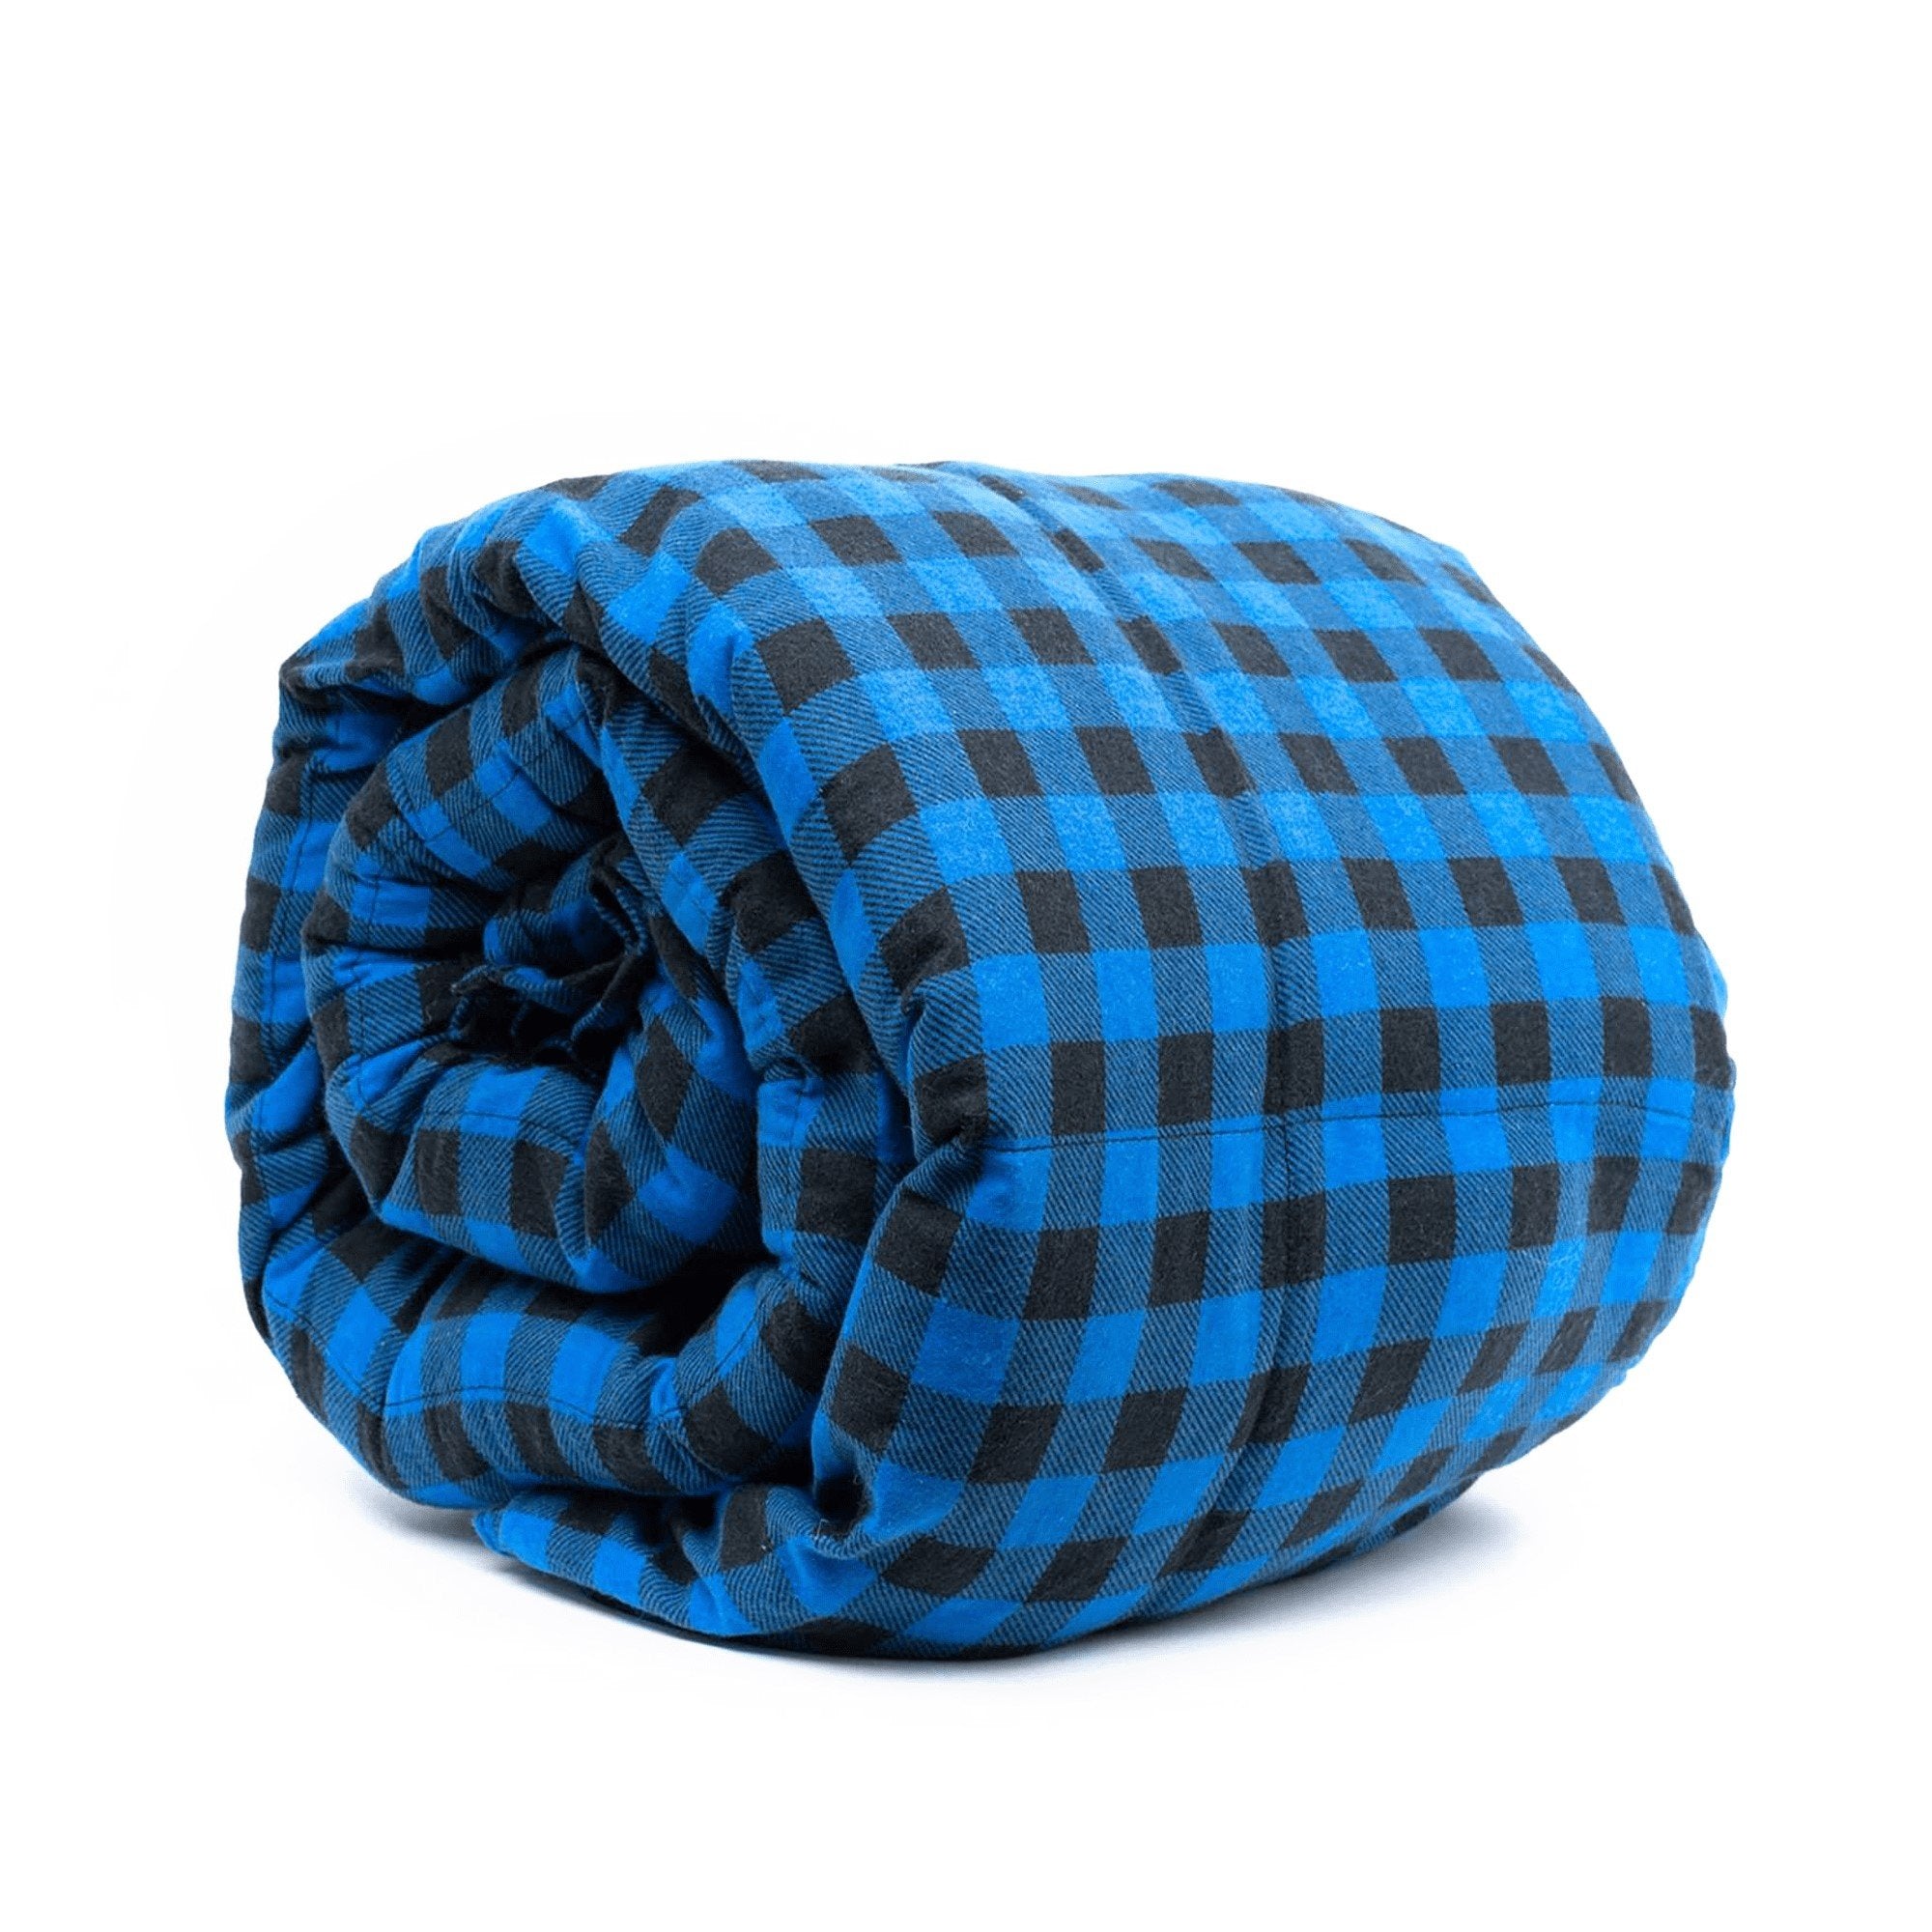 Big Blue Plaid Flannel Weighted Blanket Rolled Side View